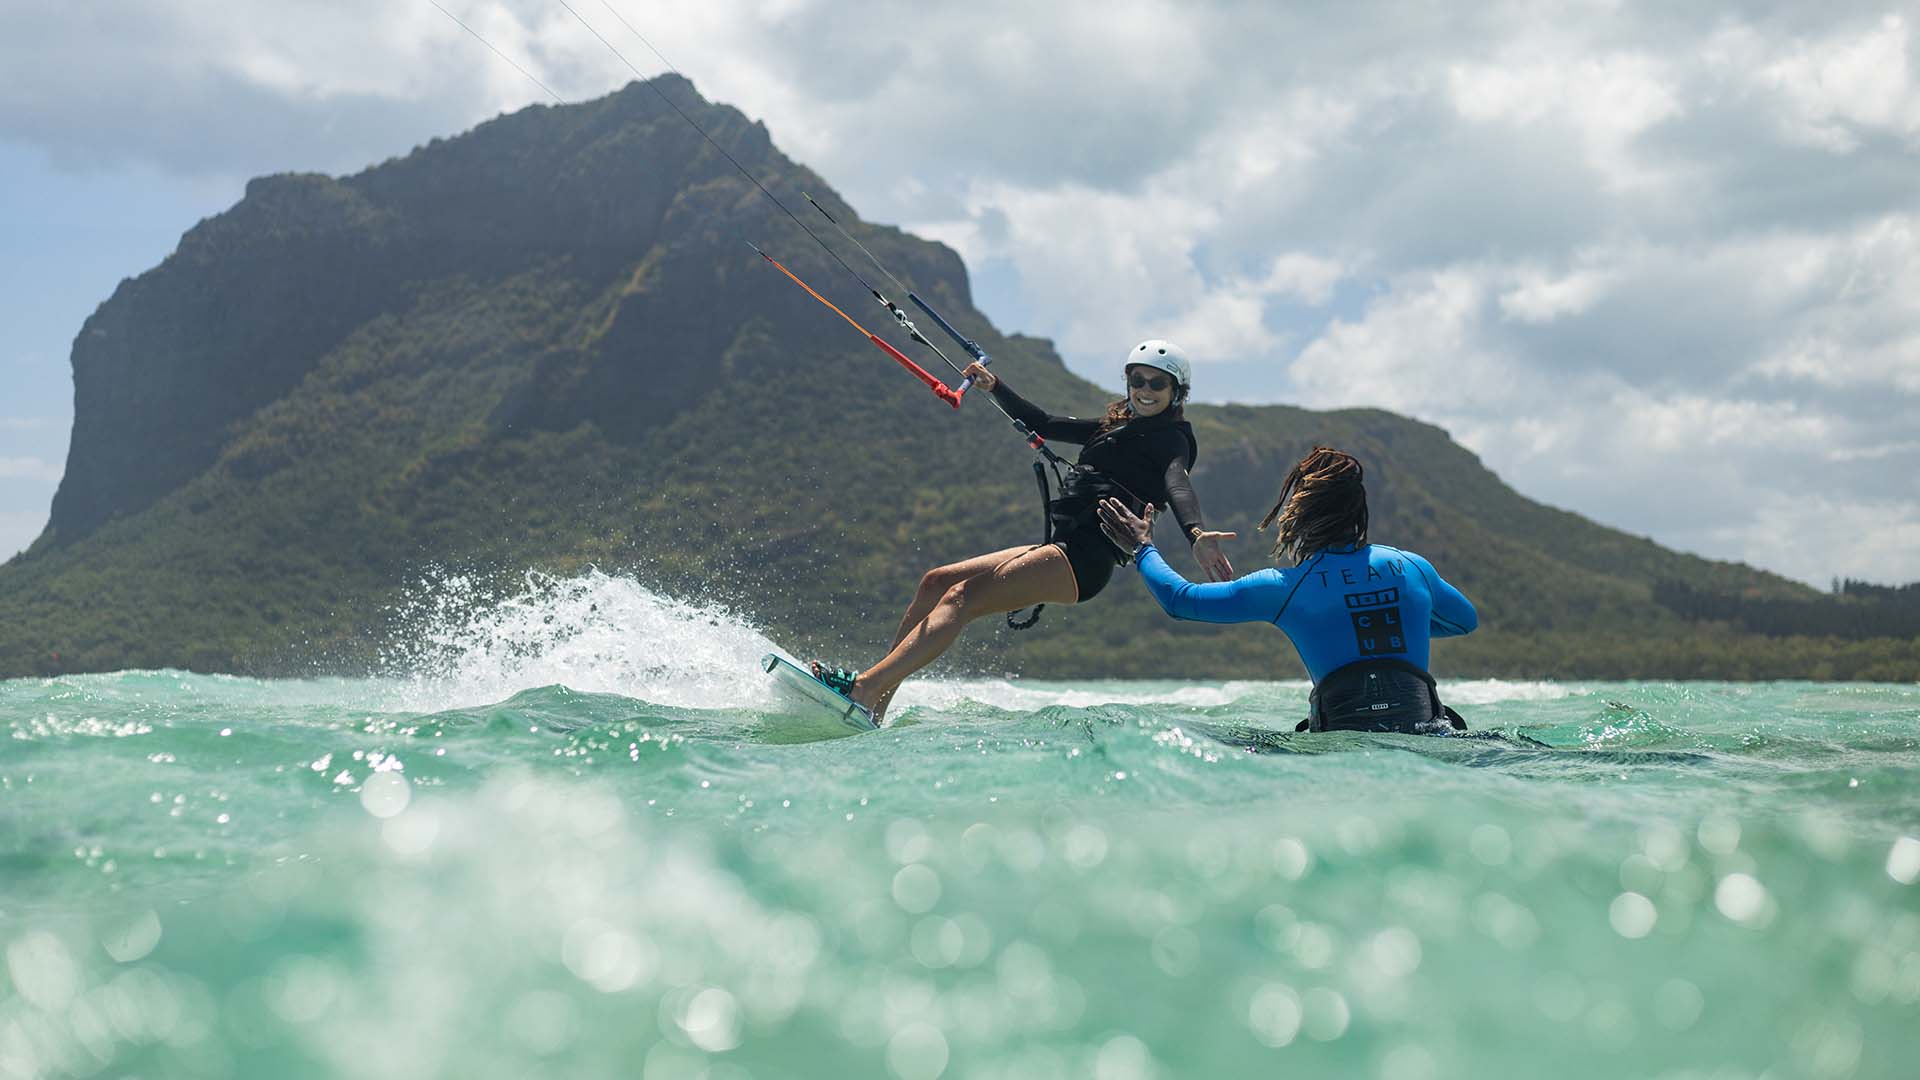 Kitesurfer lessons in turquoise water of le morne